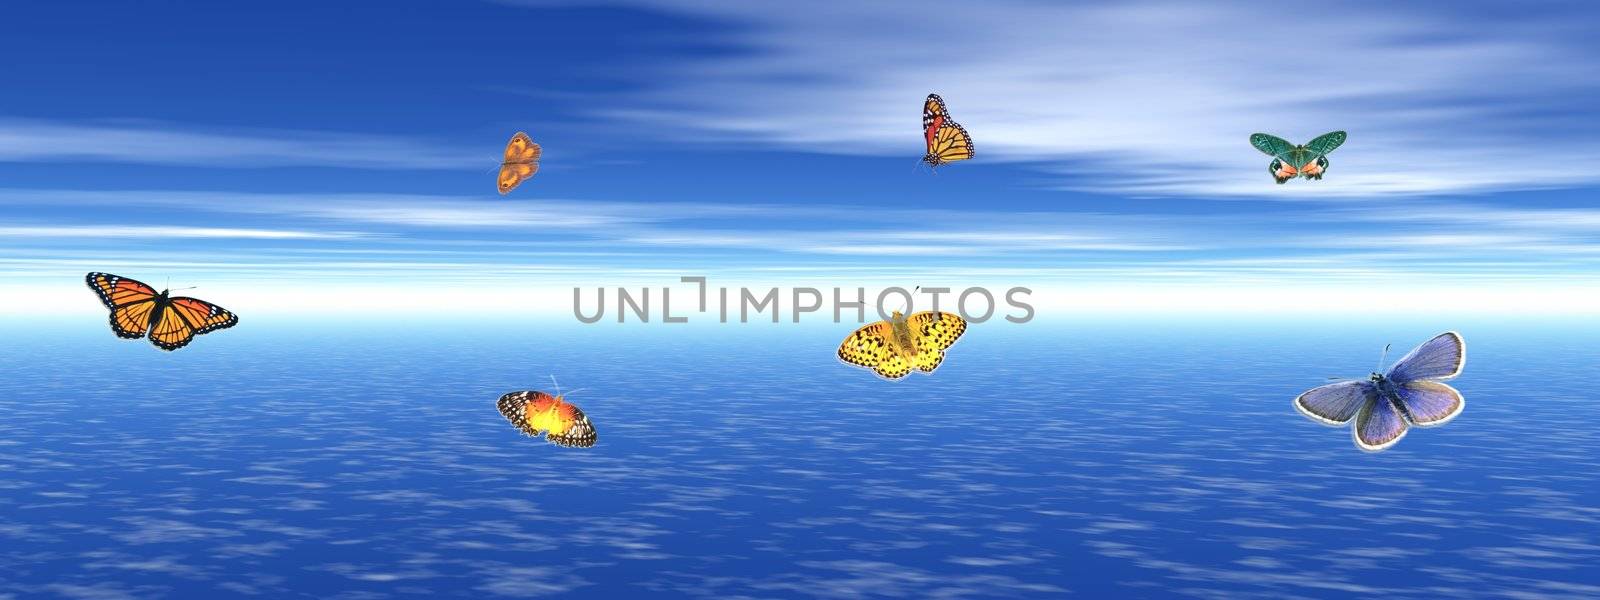 Many colored butterflies dansing upon the quiet blue ocean water by cloudy weather